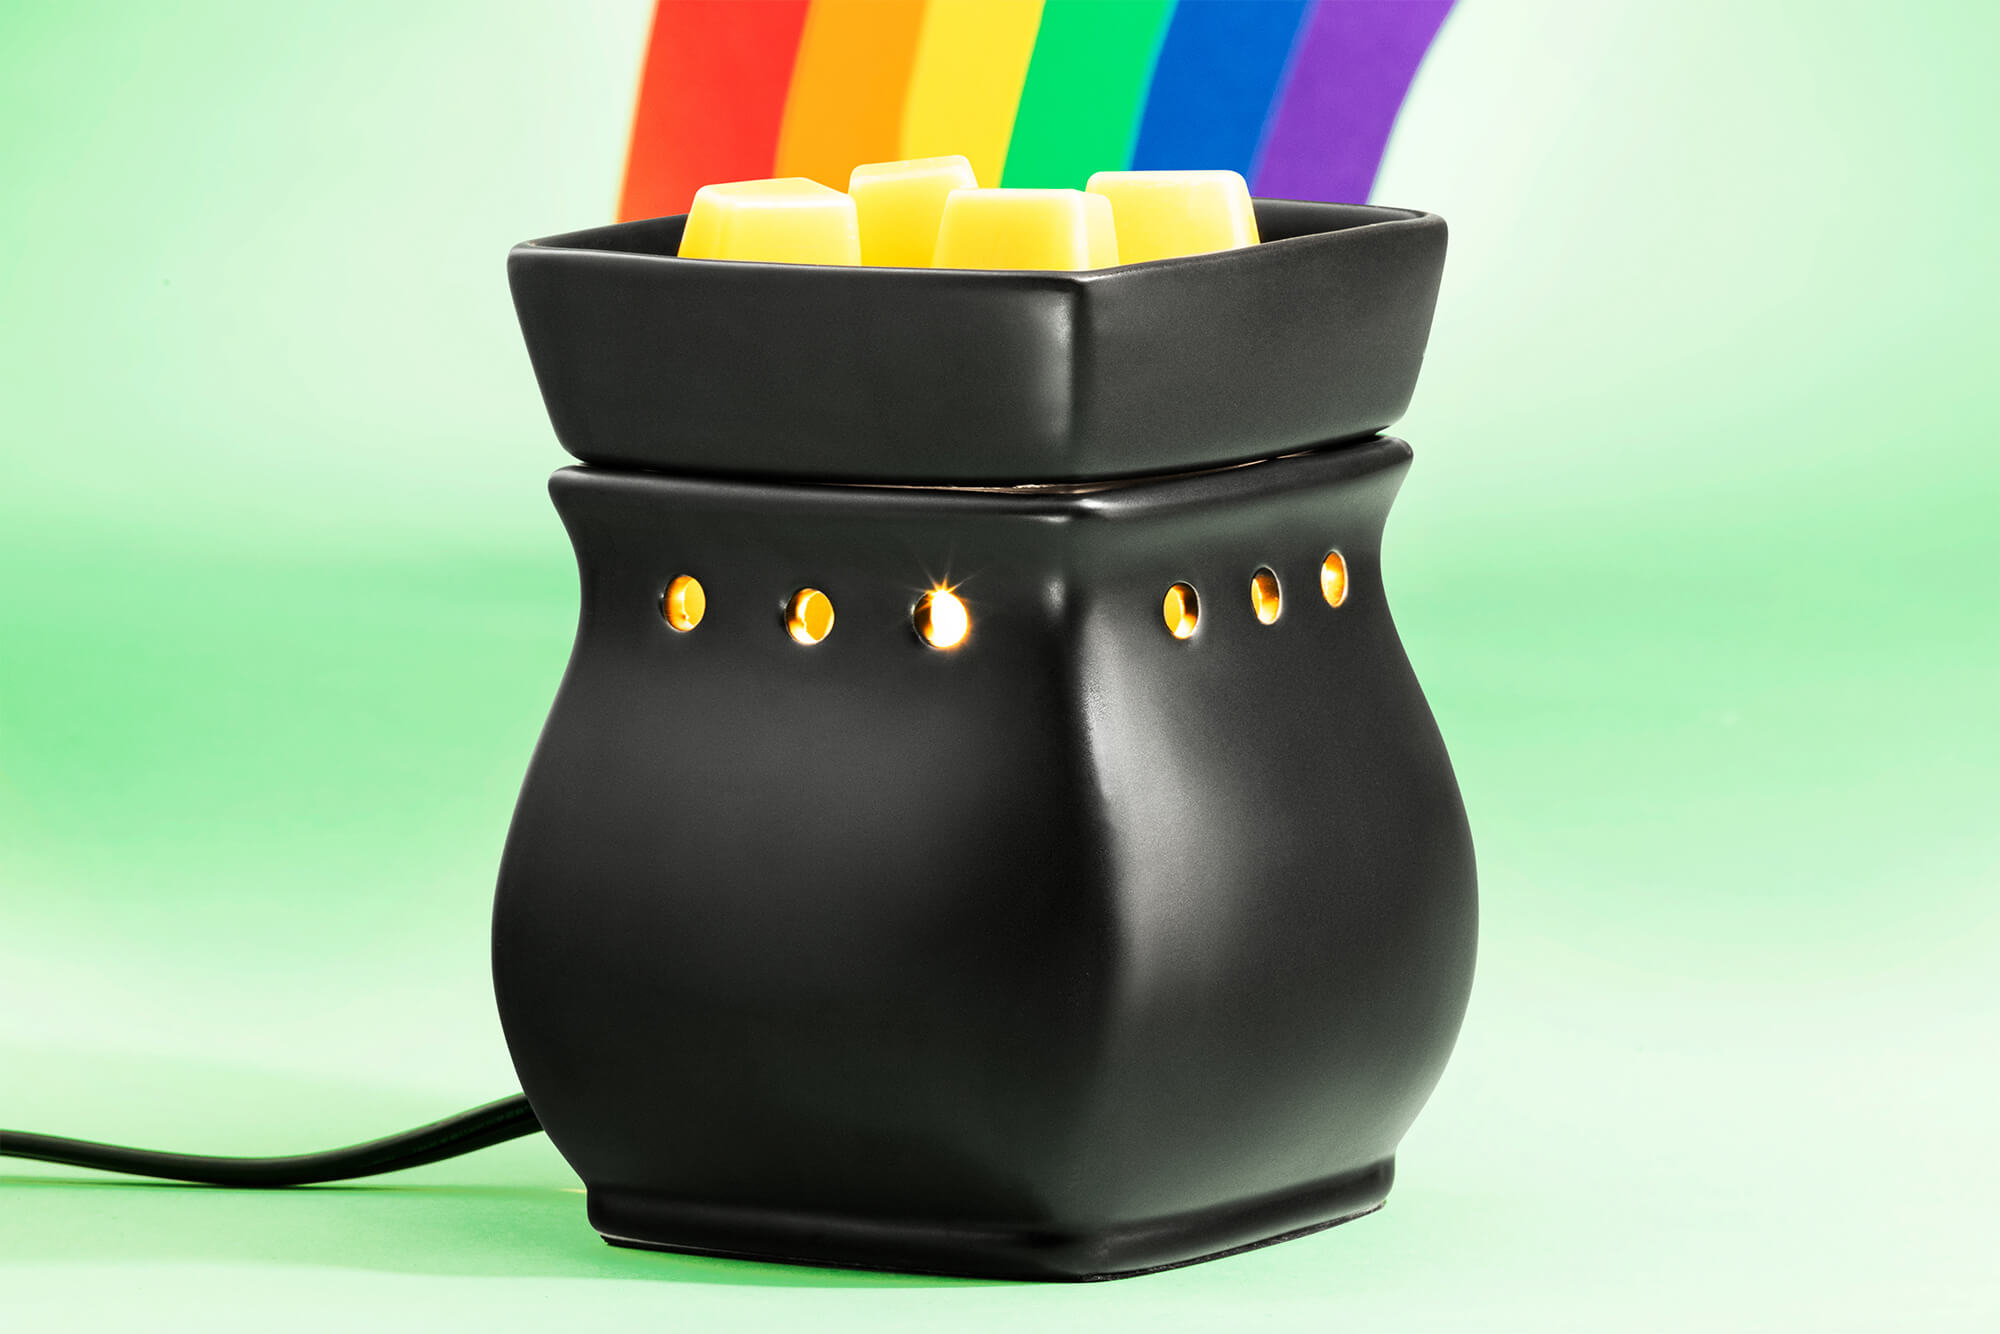 Scentsy's Classical Curve Black Satin warmer with a rainbow coming from it like a pot of gold